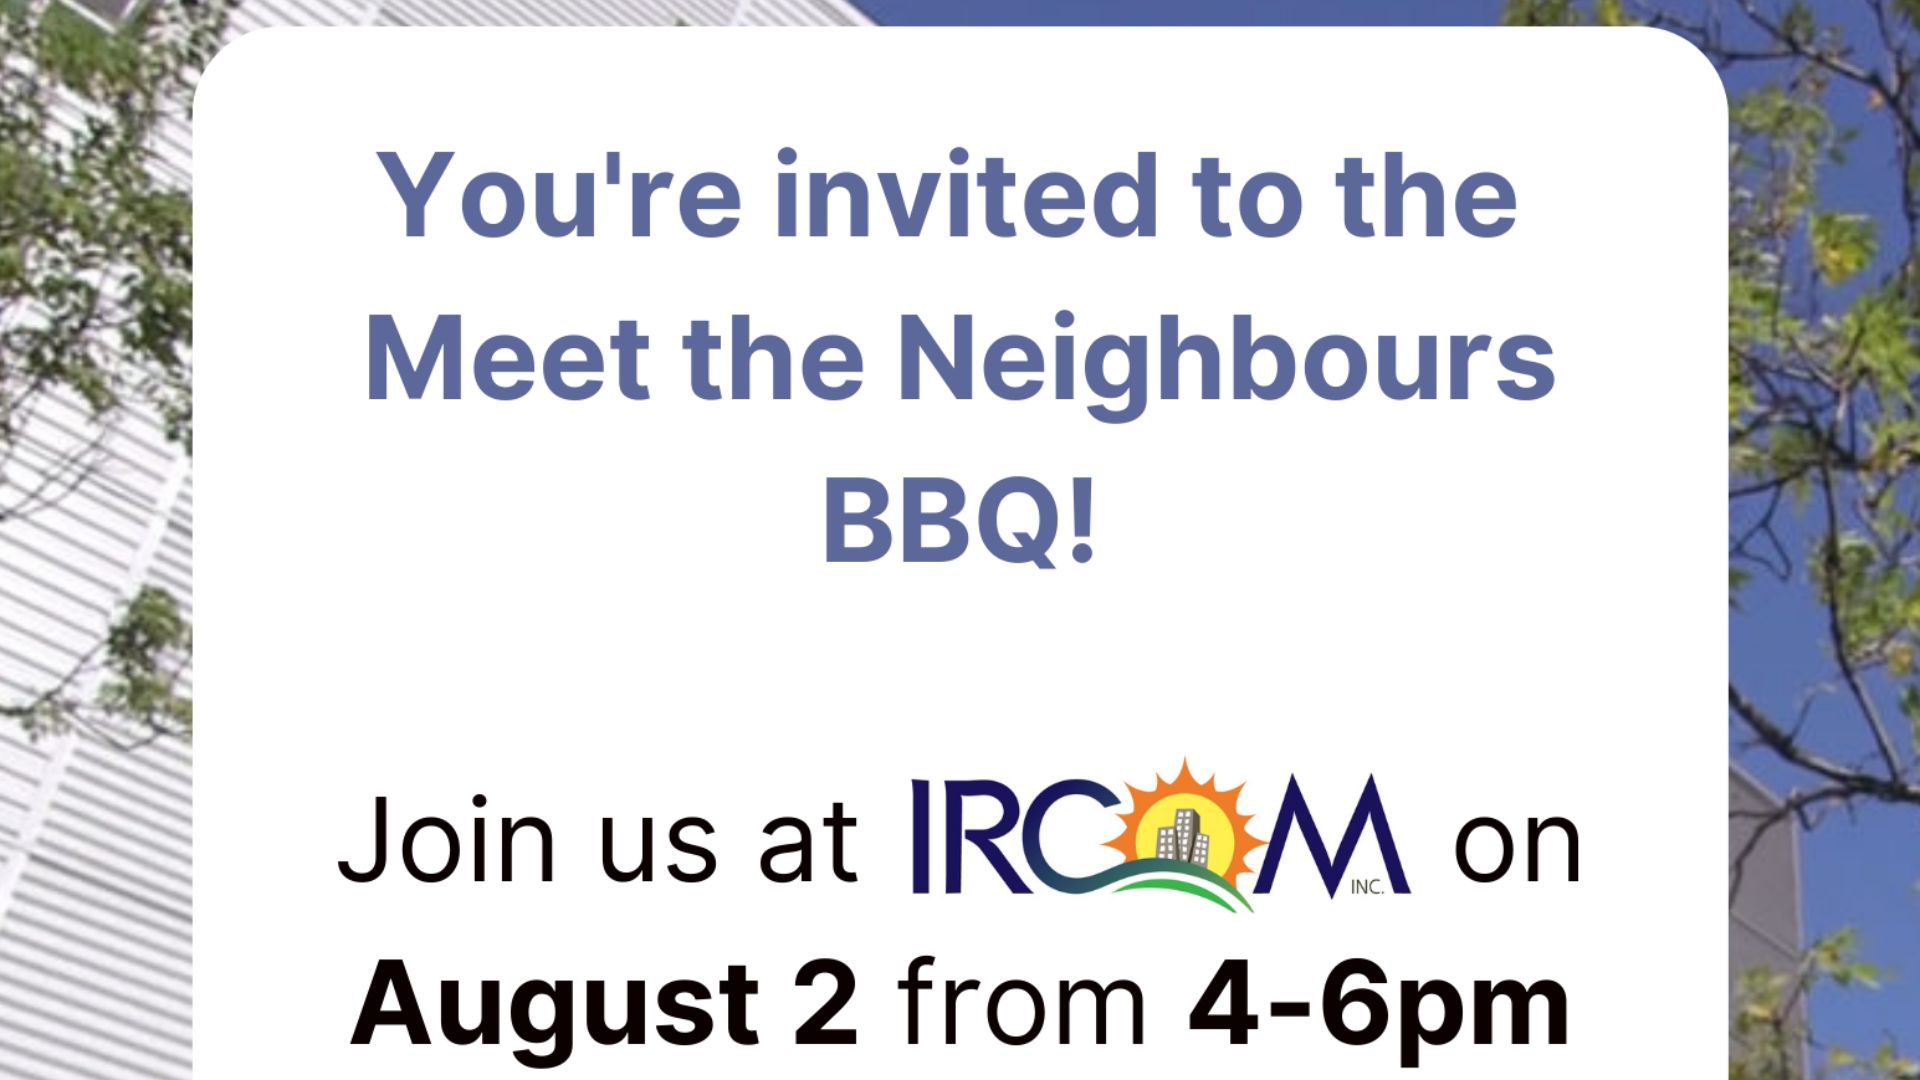 Come and enjoy with your neighbours at the Meet the Neighbours BBQ!